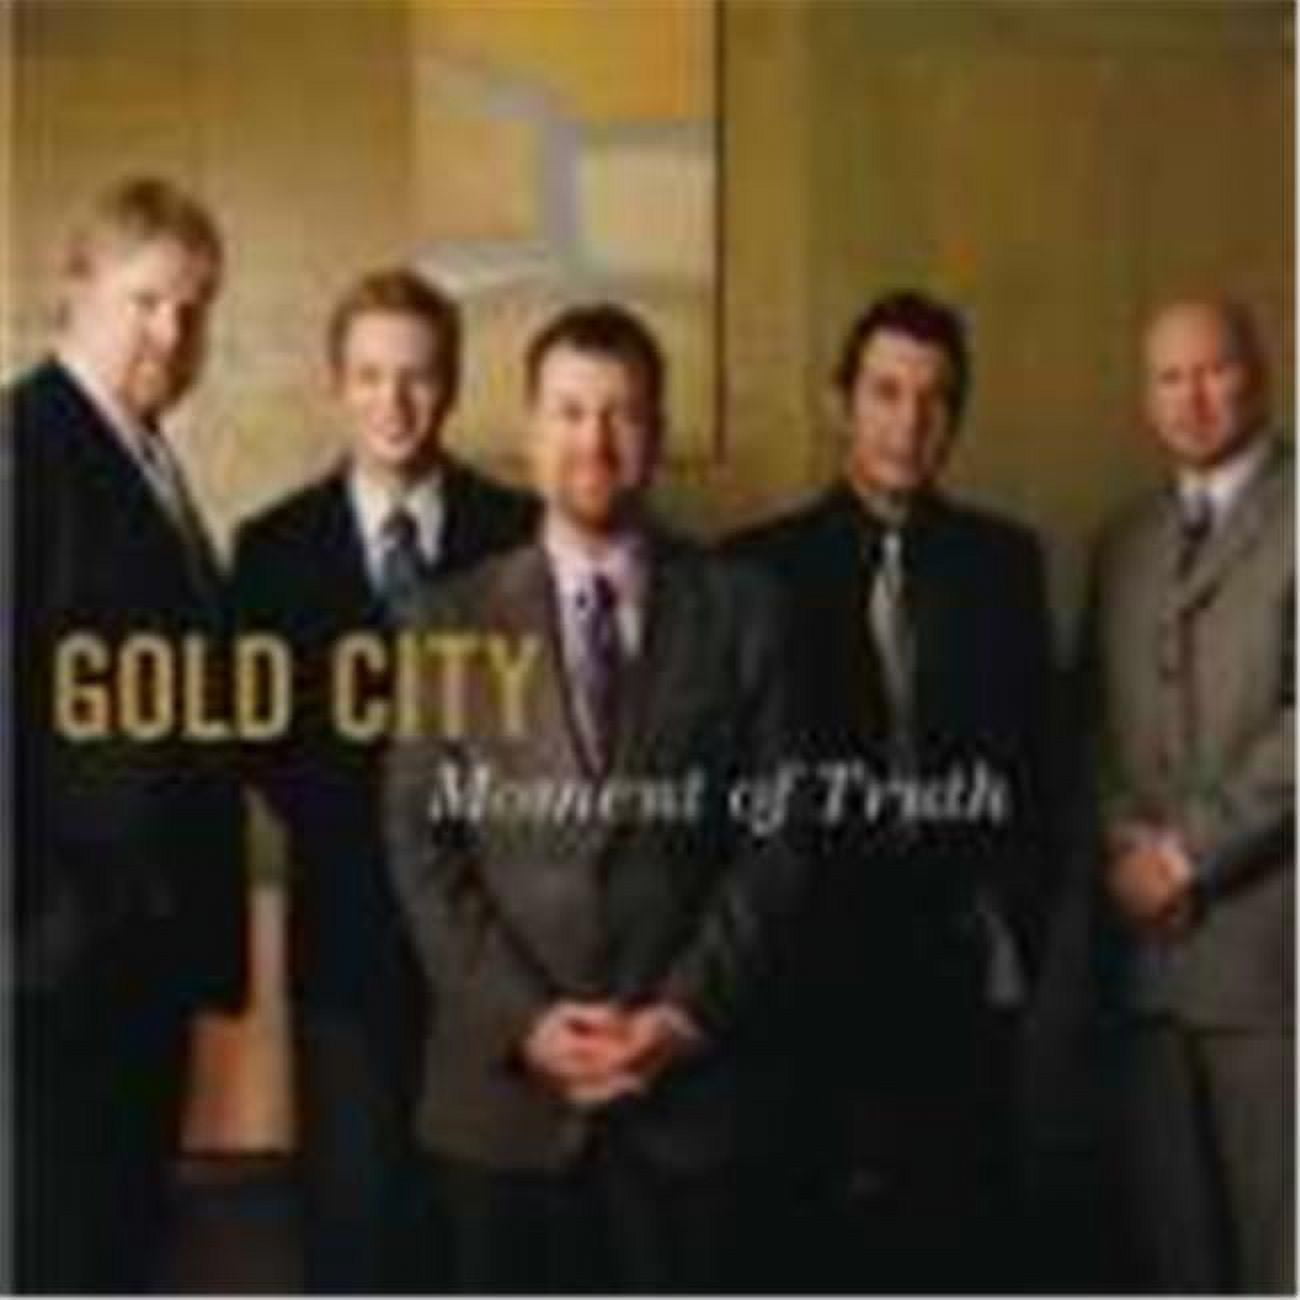 Picture of Integrity Dist 880270 Gold City-Moment of Truth Disc